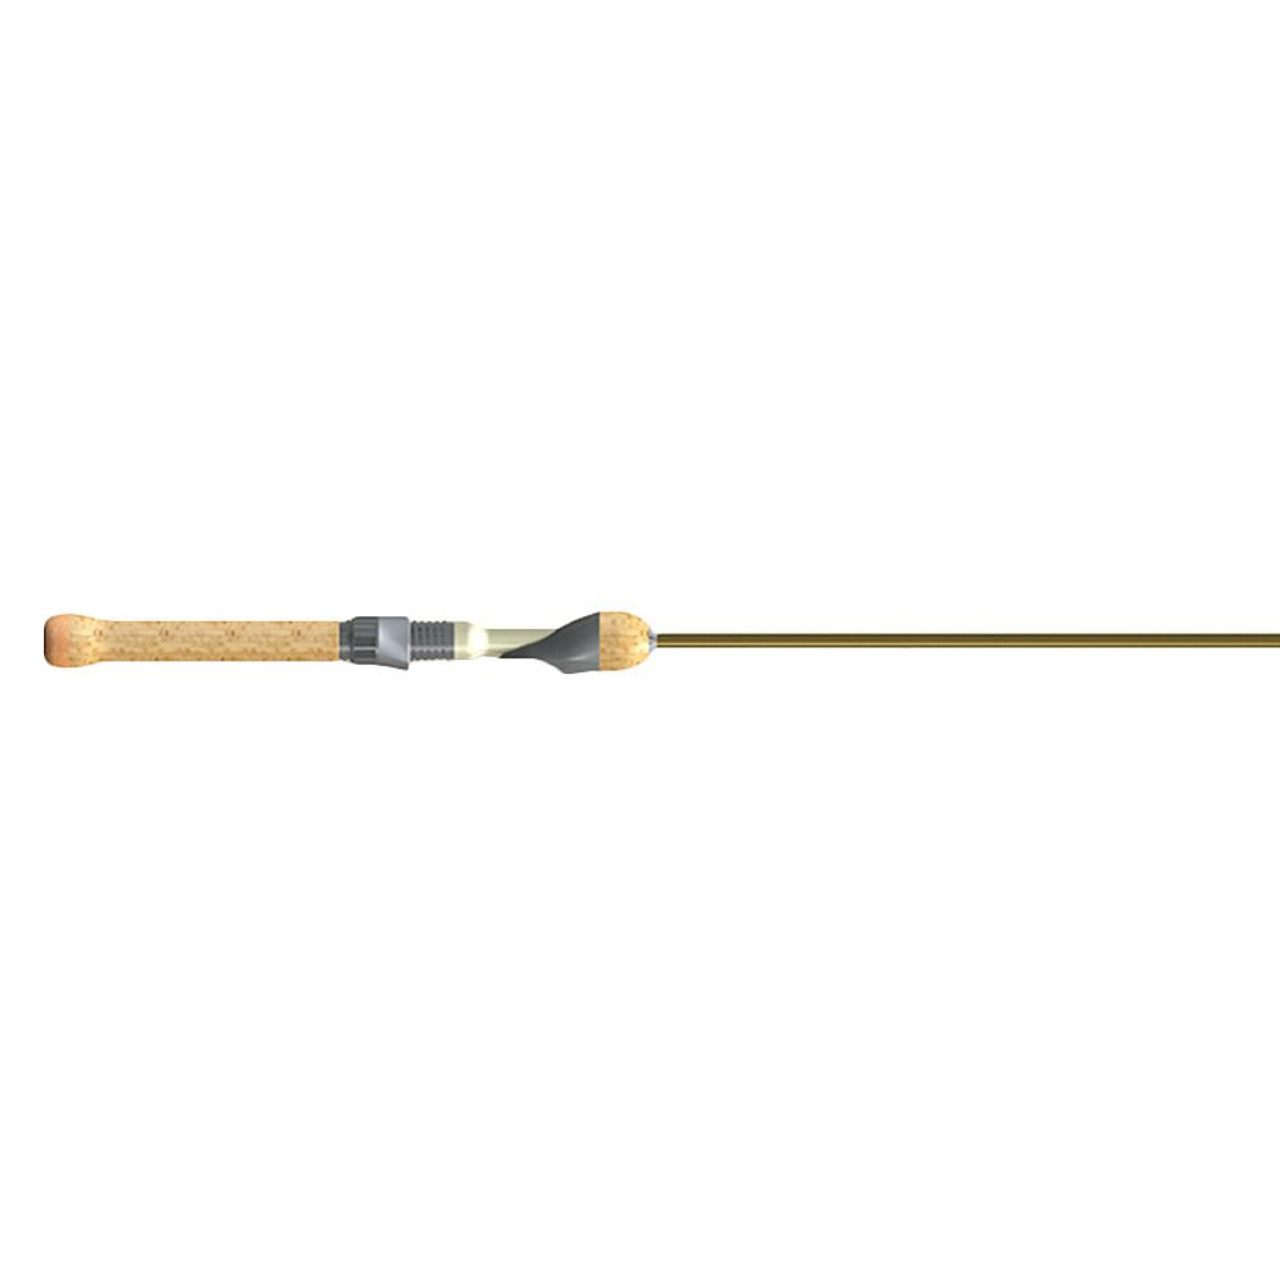 St Croix Panfish 6 UL Fast Spinning Rod - Kinsey's Outdoors